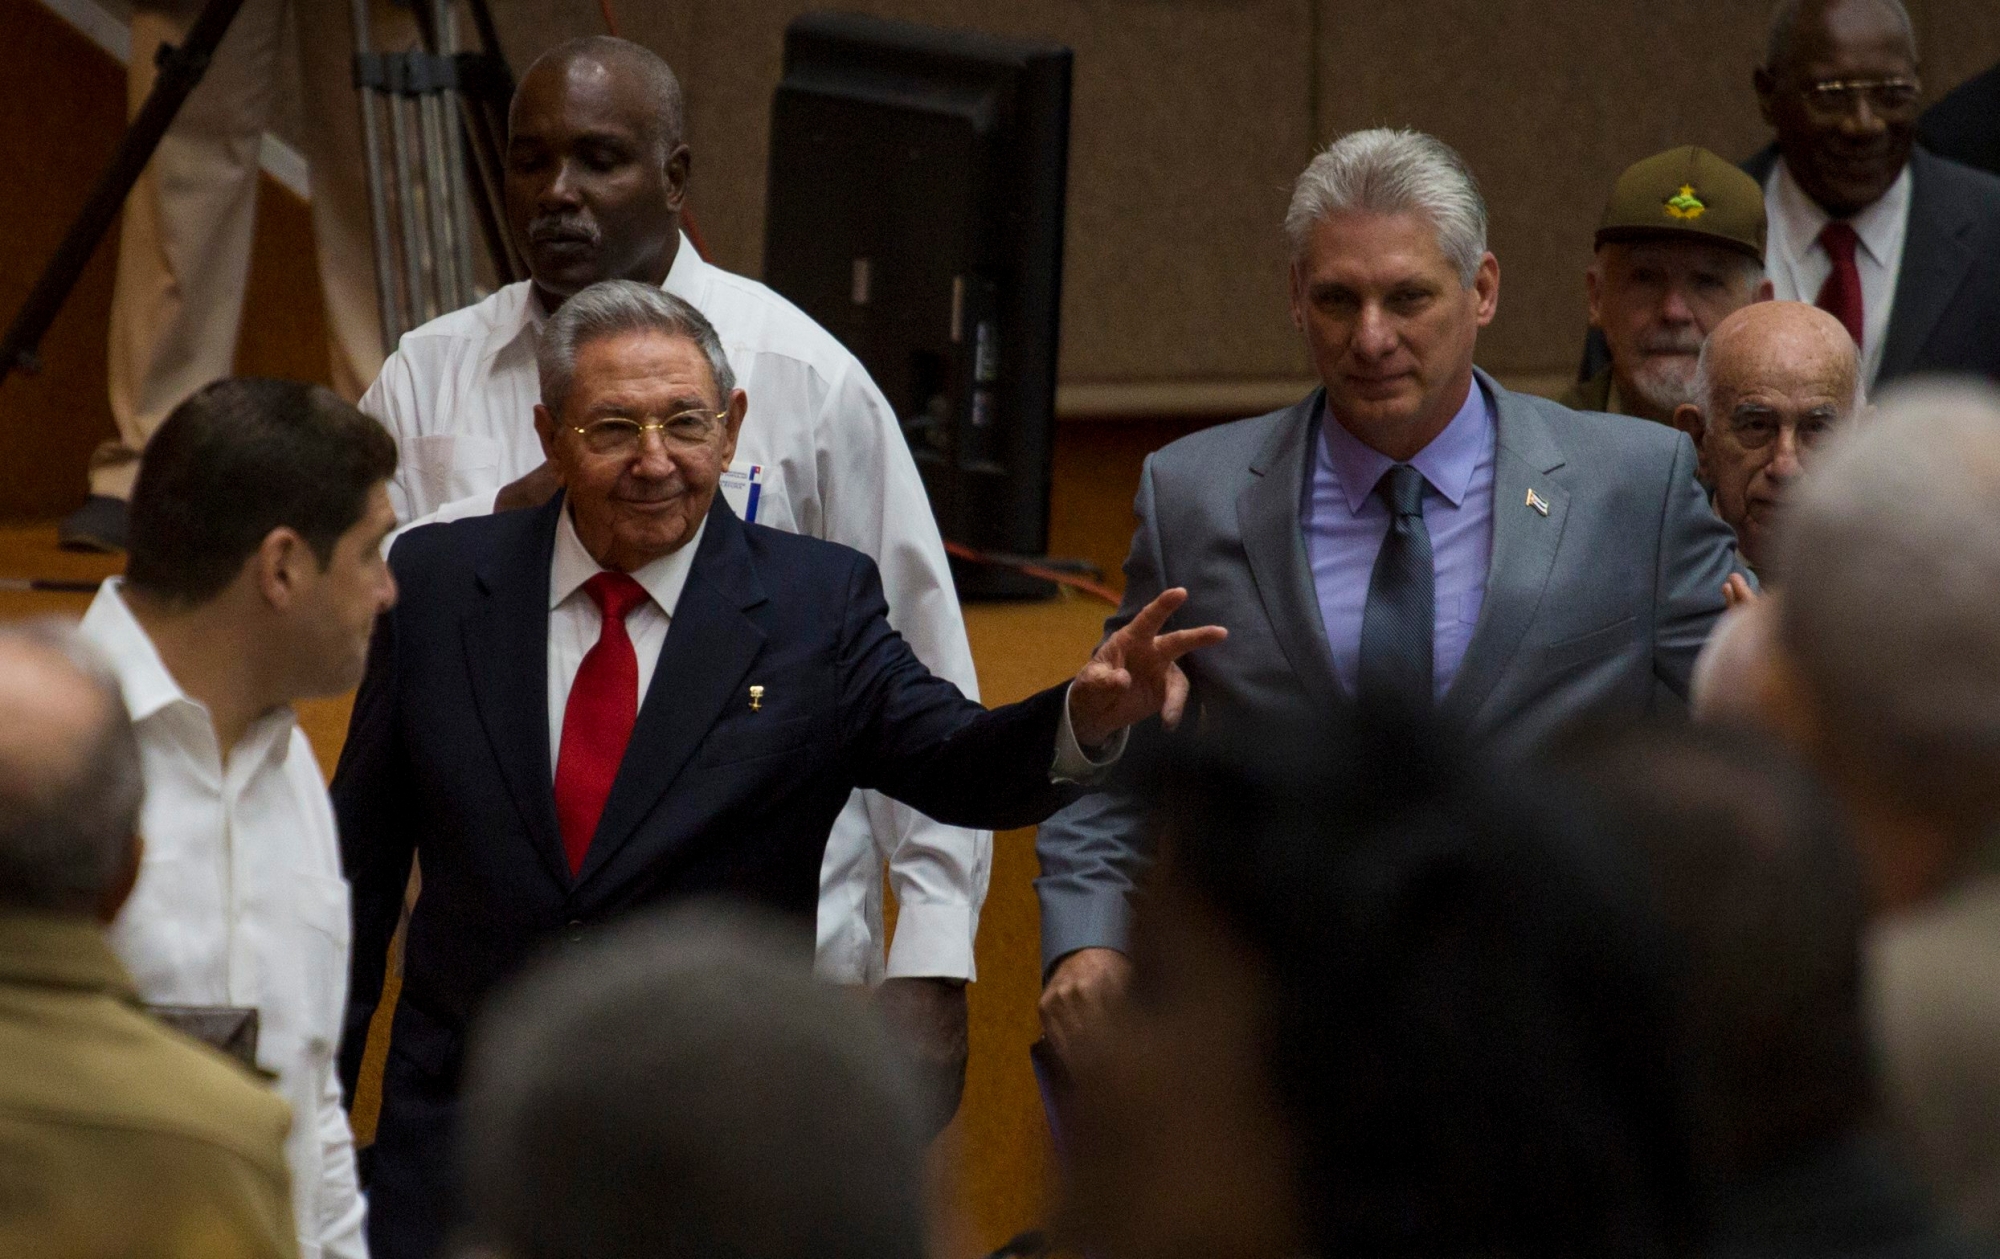 In this photo released by Cuba's state-run media Cubadebate, Cuba's President Raul Castro, center left, enters the National Assembly followed by his successor Miguel Diaz-Canel, center right, for the start of two-day legislative session in Havana, Cuba, Wednesday, April 18, 2018. The Cuban assembly selected the 57-year-old First Vice President as the sole candidate to succeed Castro on Wednesday, in a transition aimed at ensuring that the country's single-party system outlasts the aging revolutionaries who created it. (Irene Perez/Cubadebate via AP) Cuba Transition